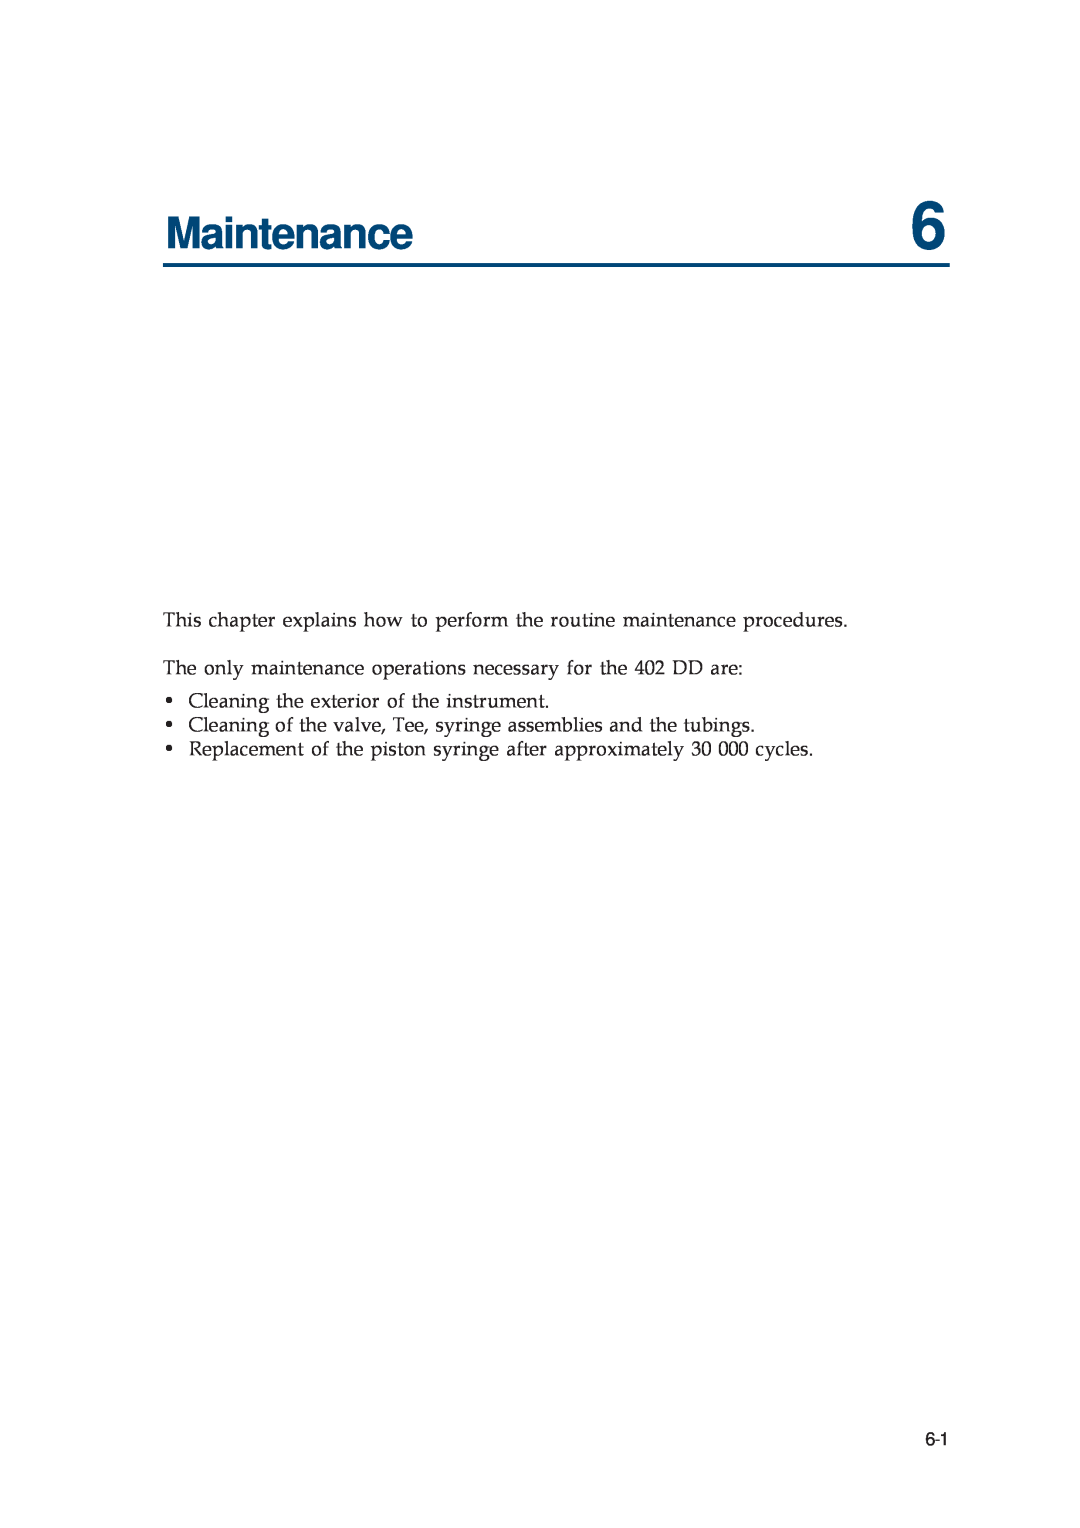 Gilson manual Maintenance6, The only maintenance operations necessary for the 402 DD are 